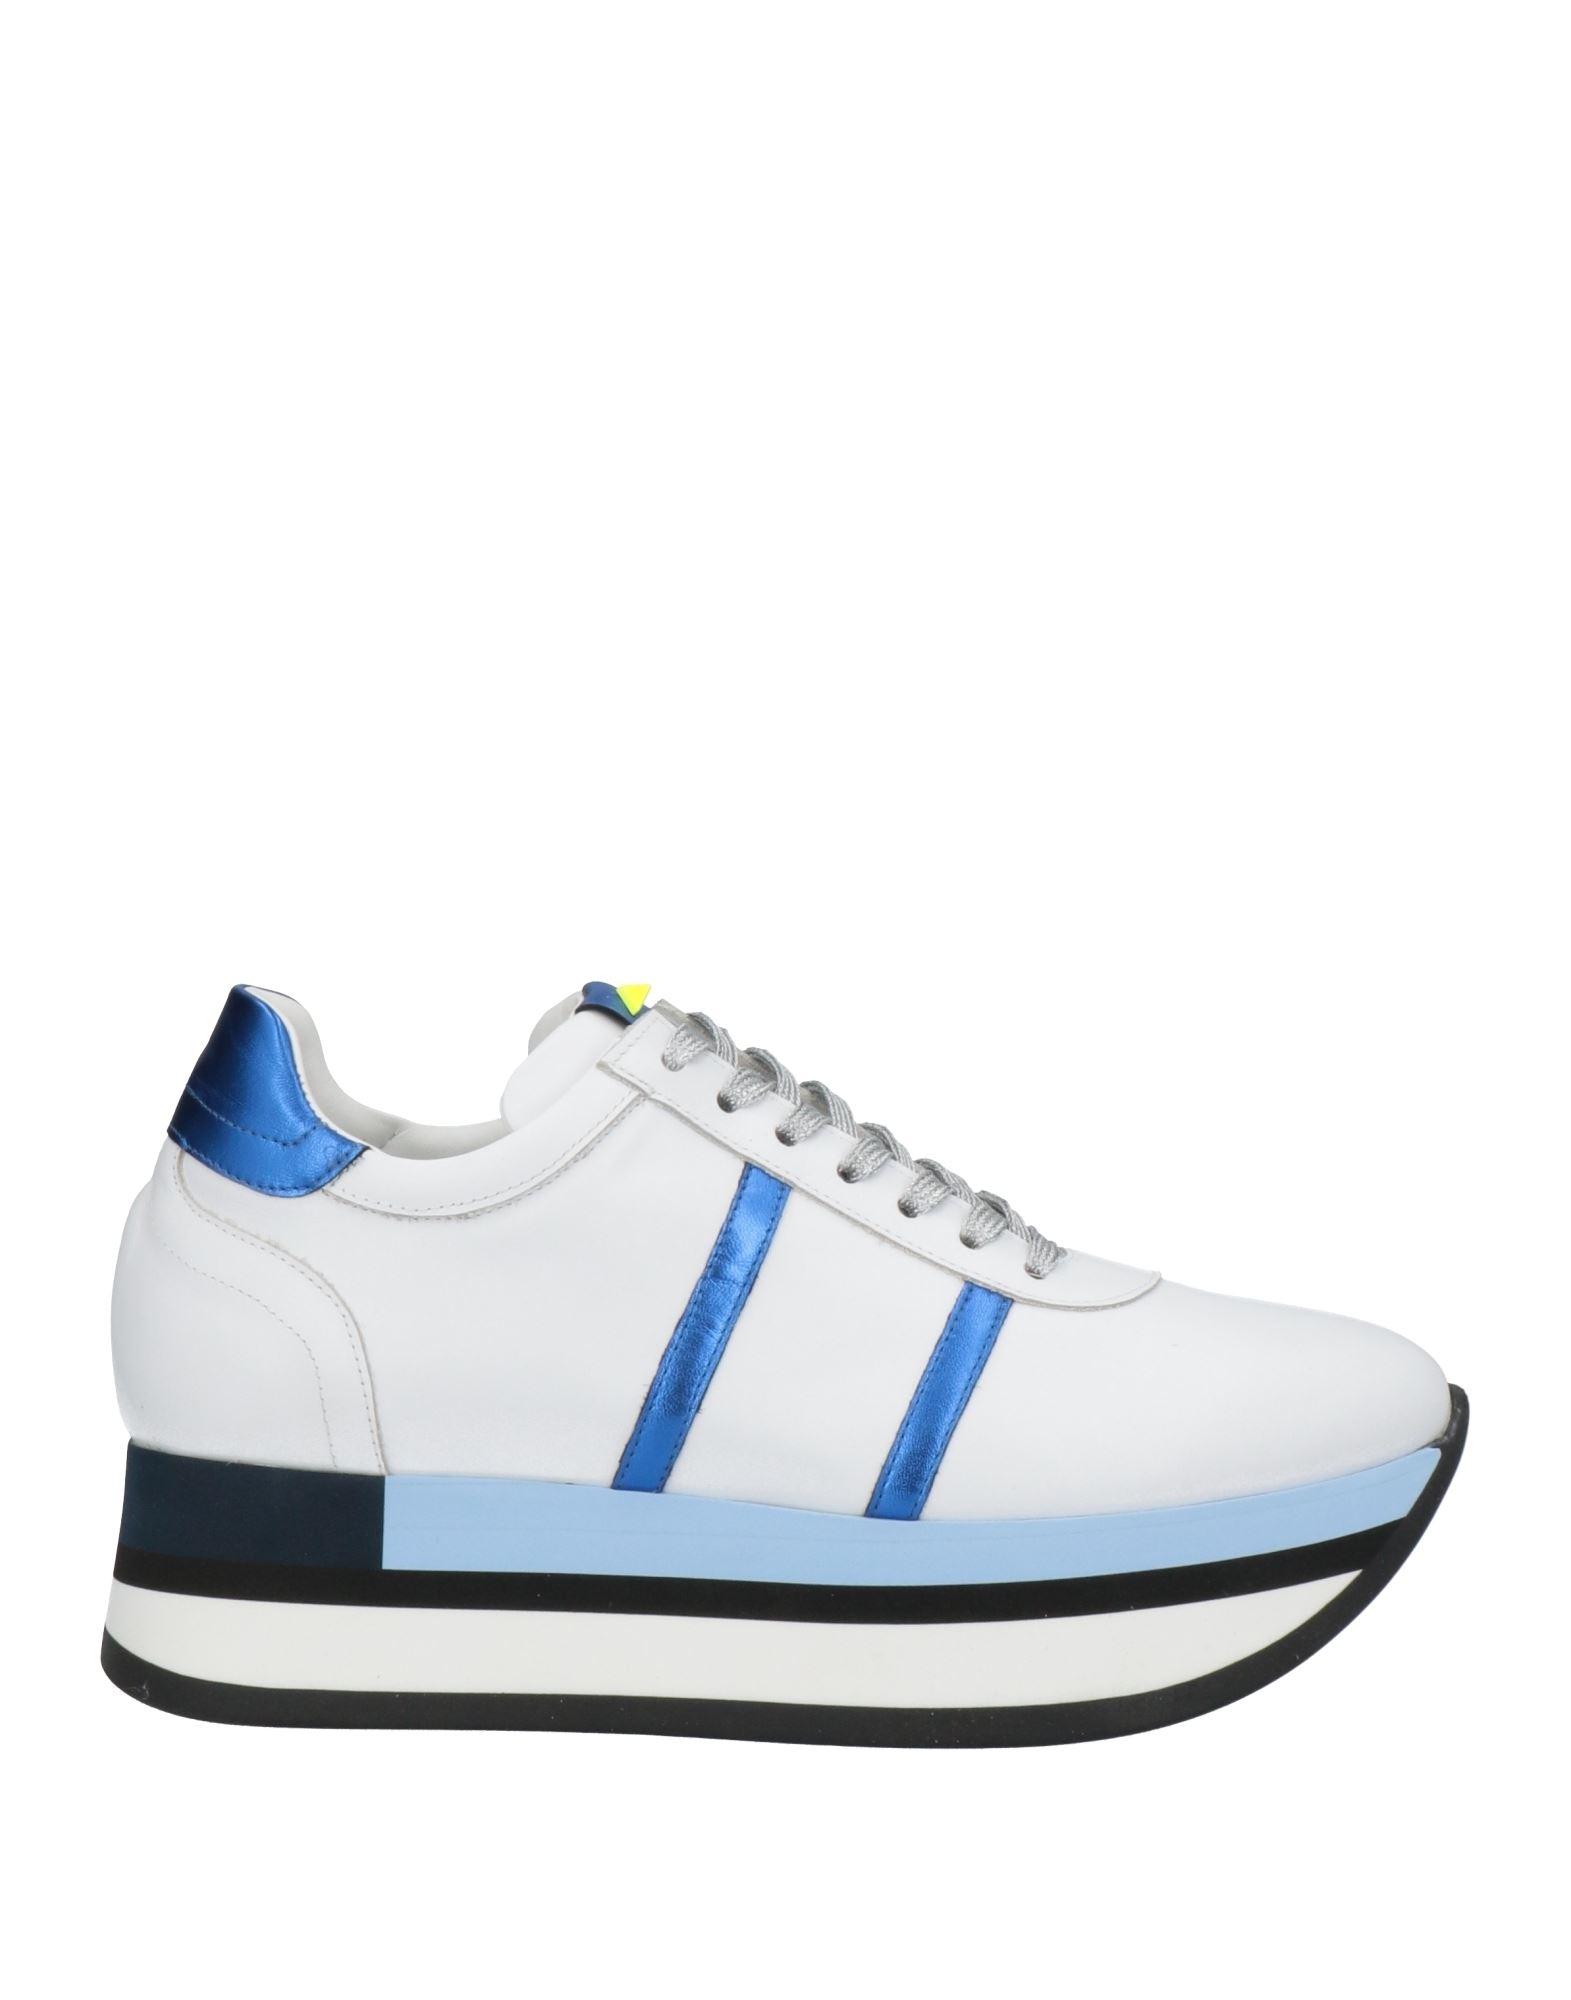 Jeannot Leather Sneakers in White (Blue) | Lyst